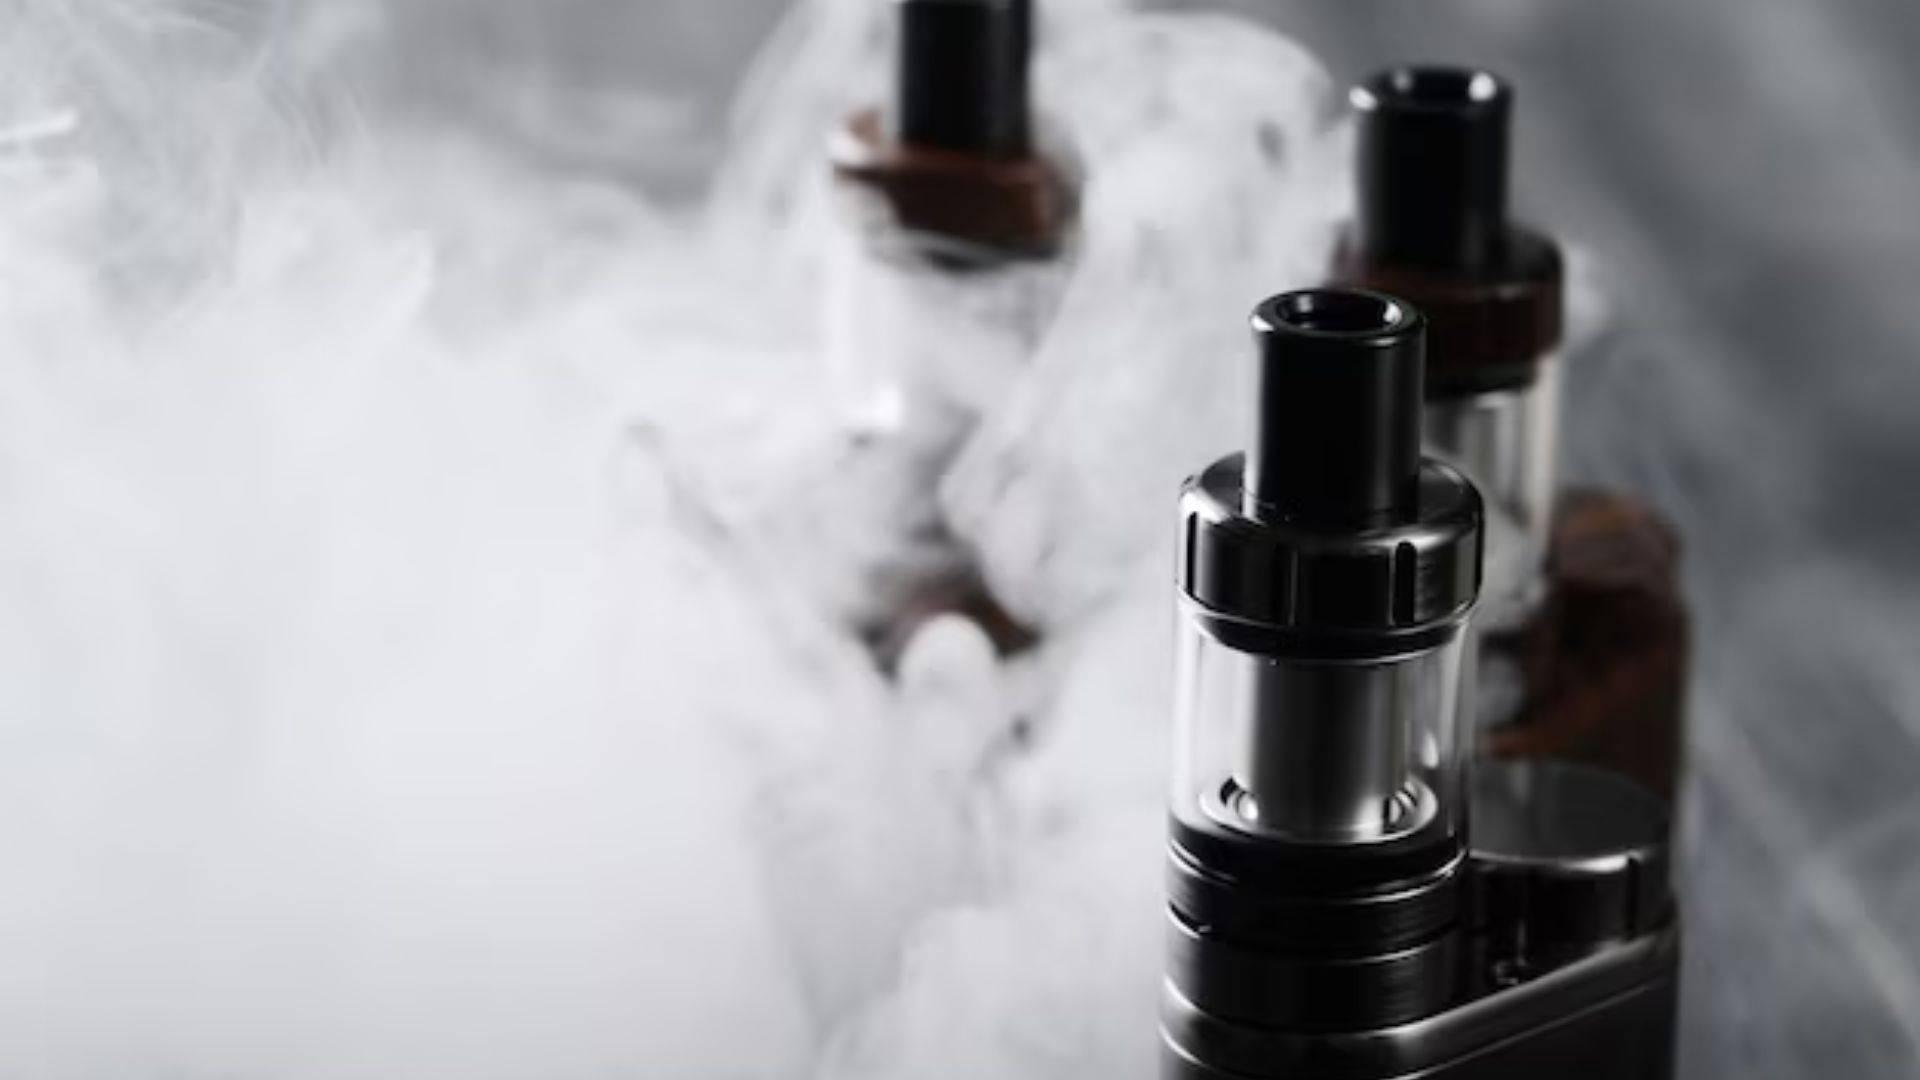 Vape Making Hissing Noise When Not in Use